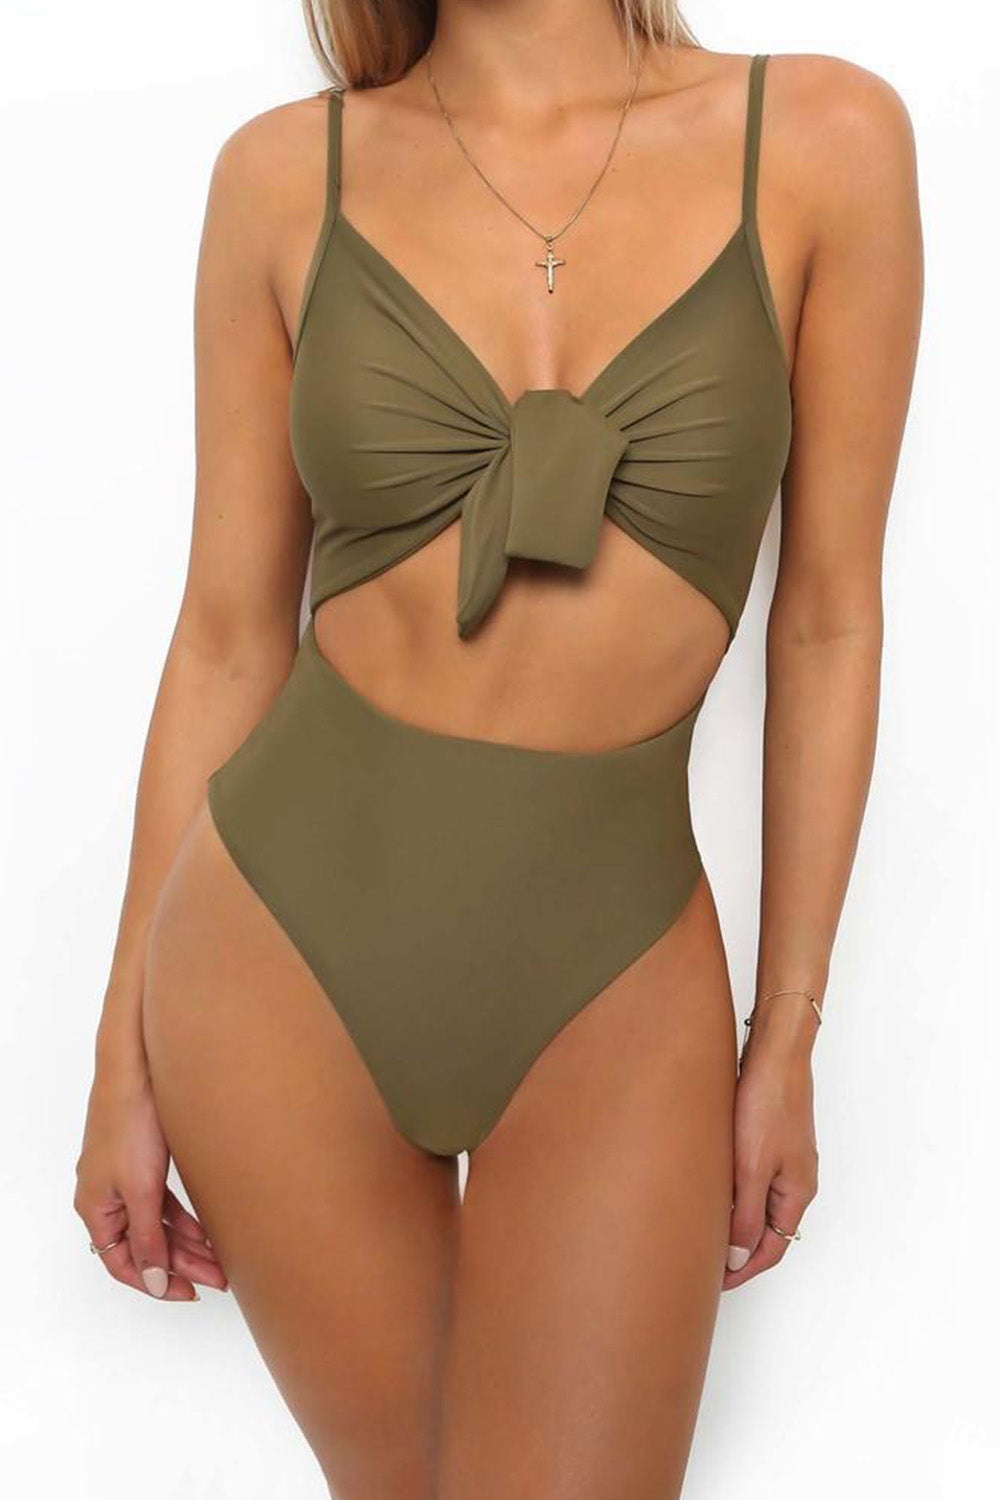 Iyasson Hollow Out One-piece Swimsuit with Bowknot